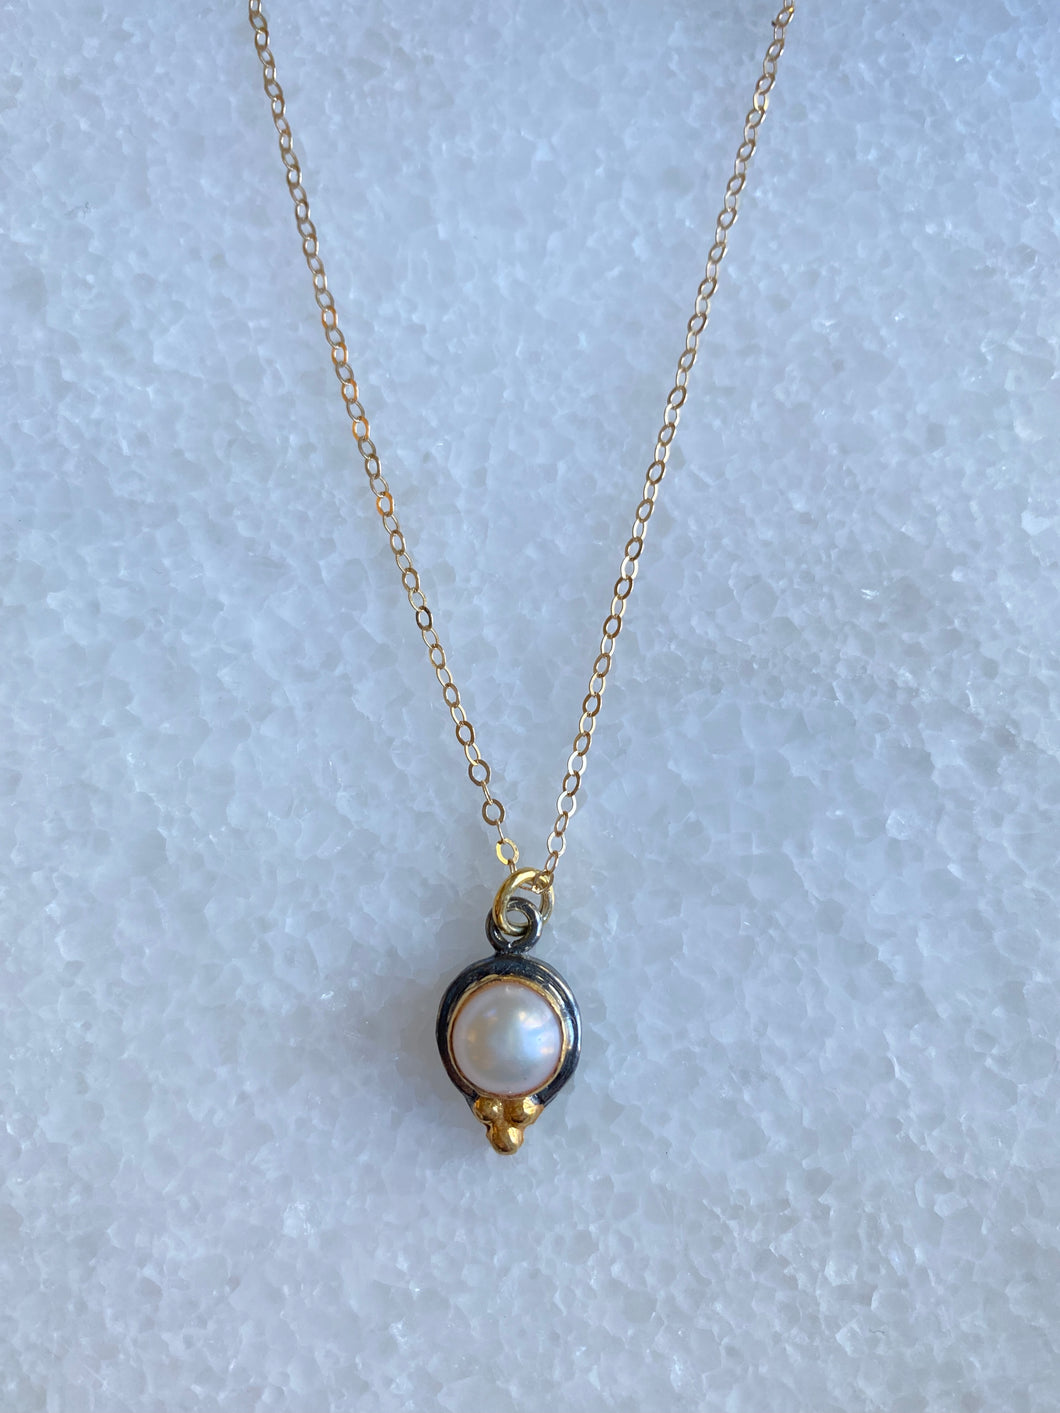 Byzantine fresh water pearl necklace